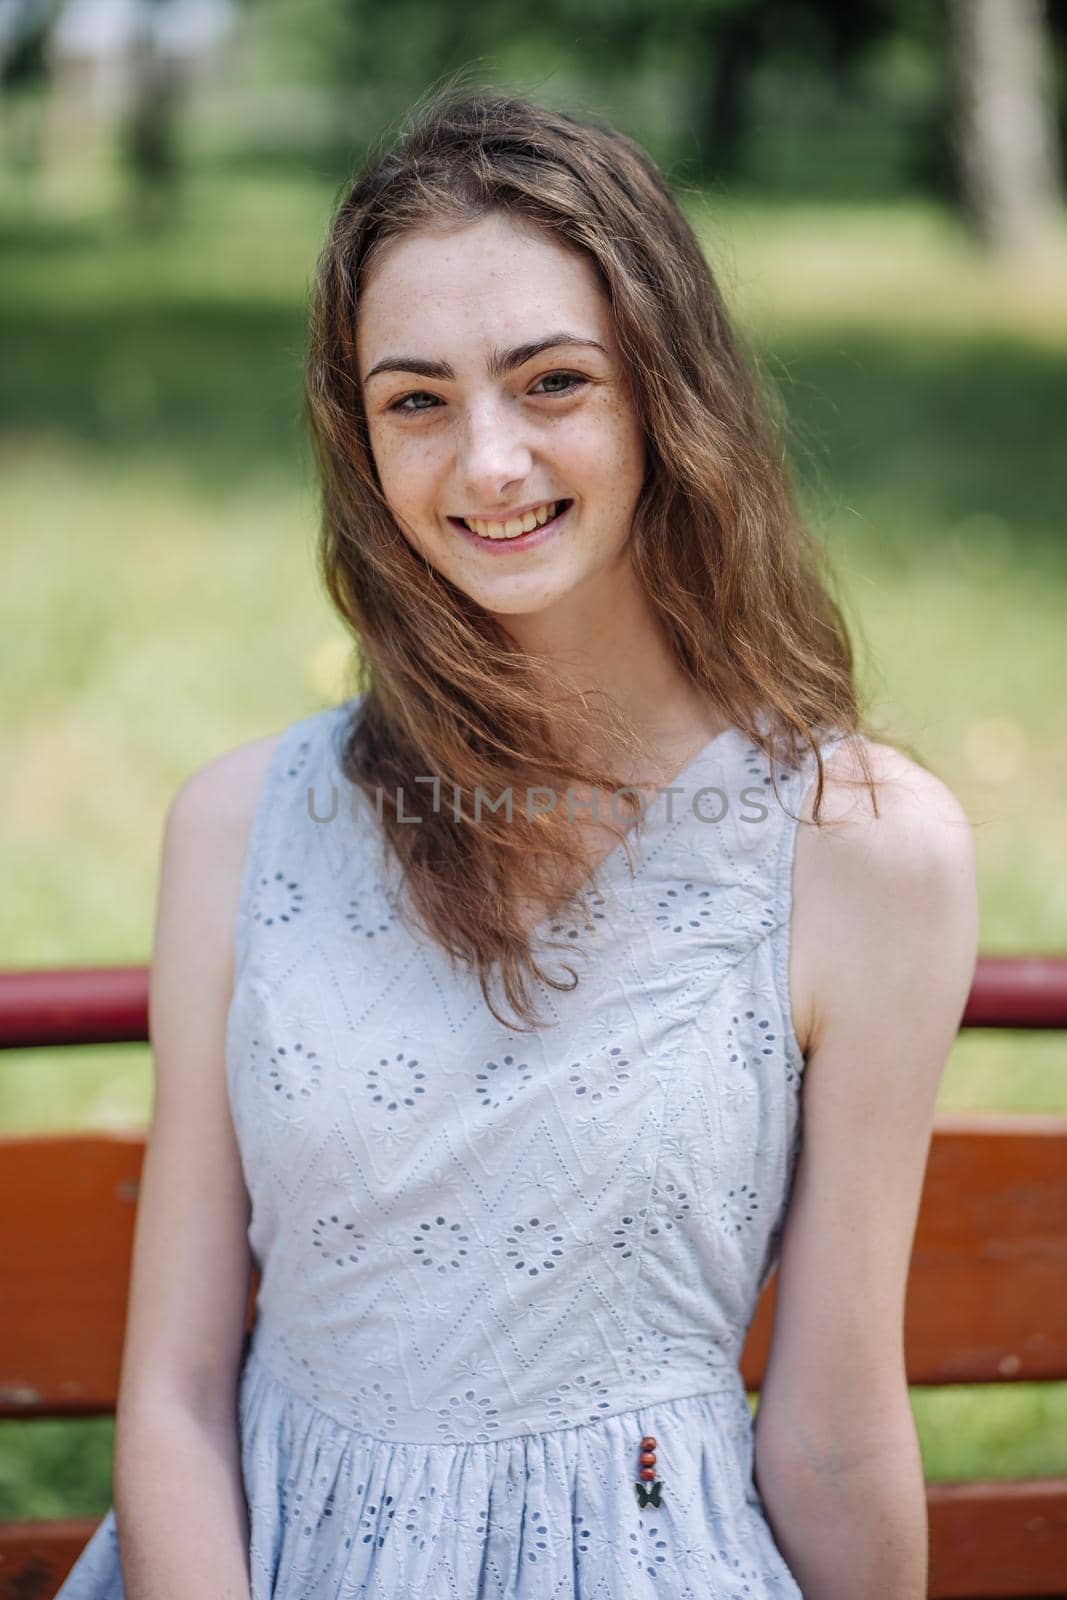 Portrait of a young smiling girl on a park bench